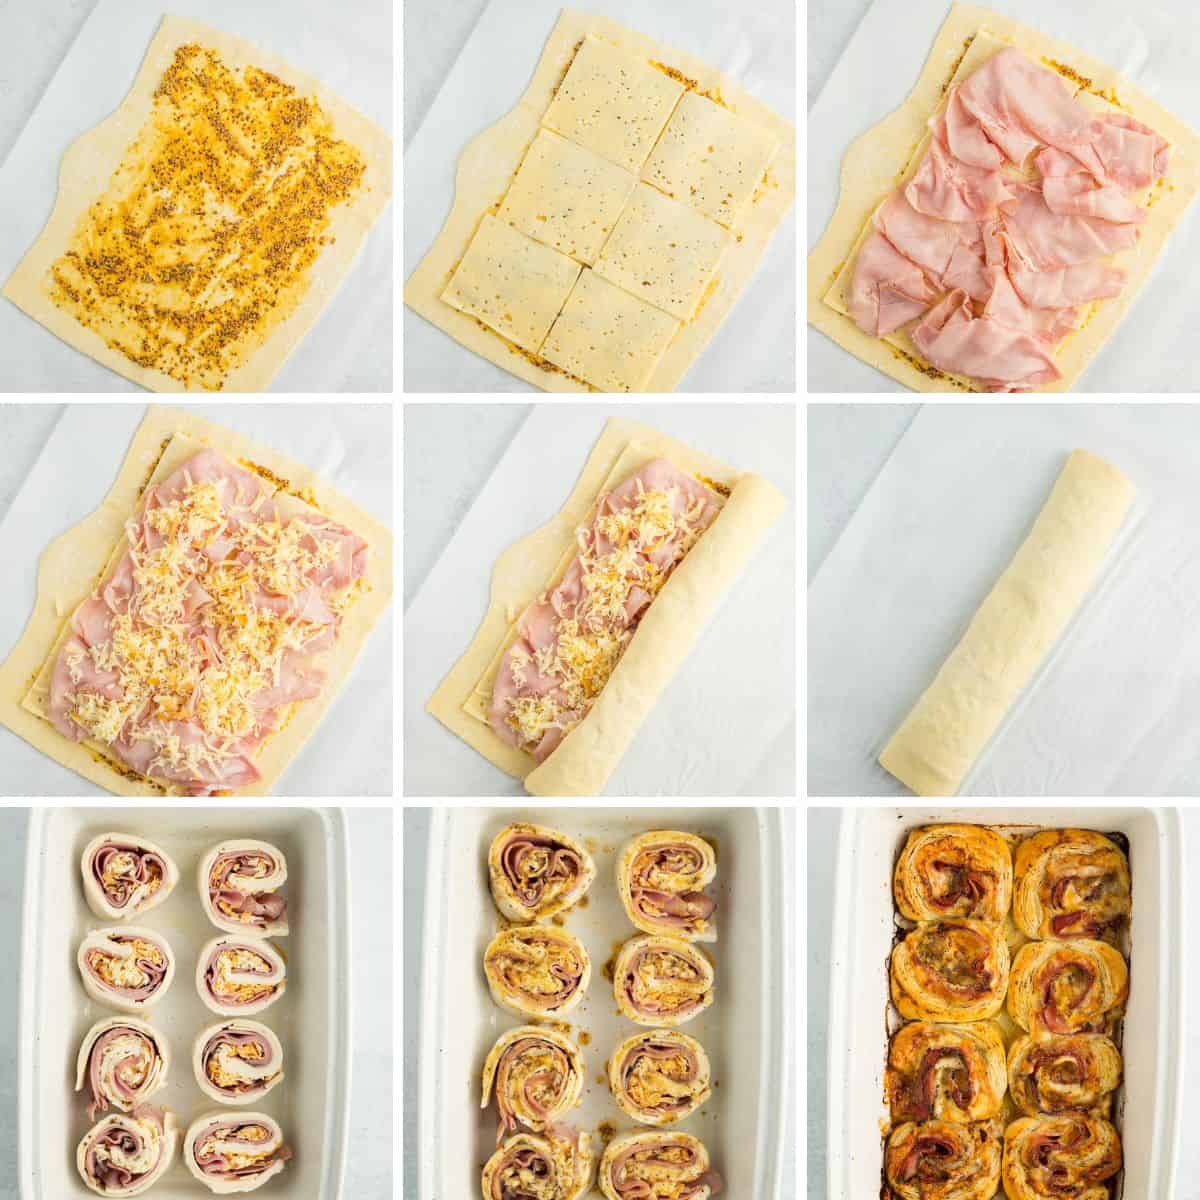 9 photos showing how to make and roll ham rollups.